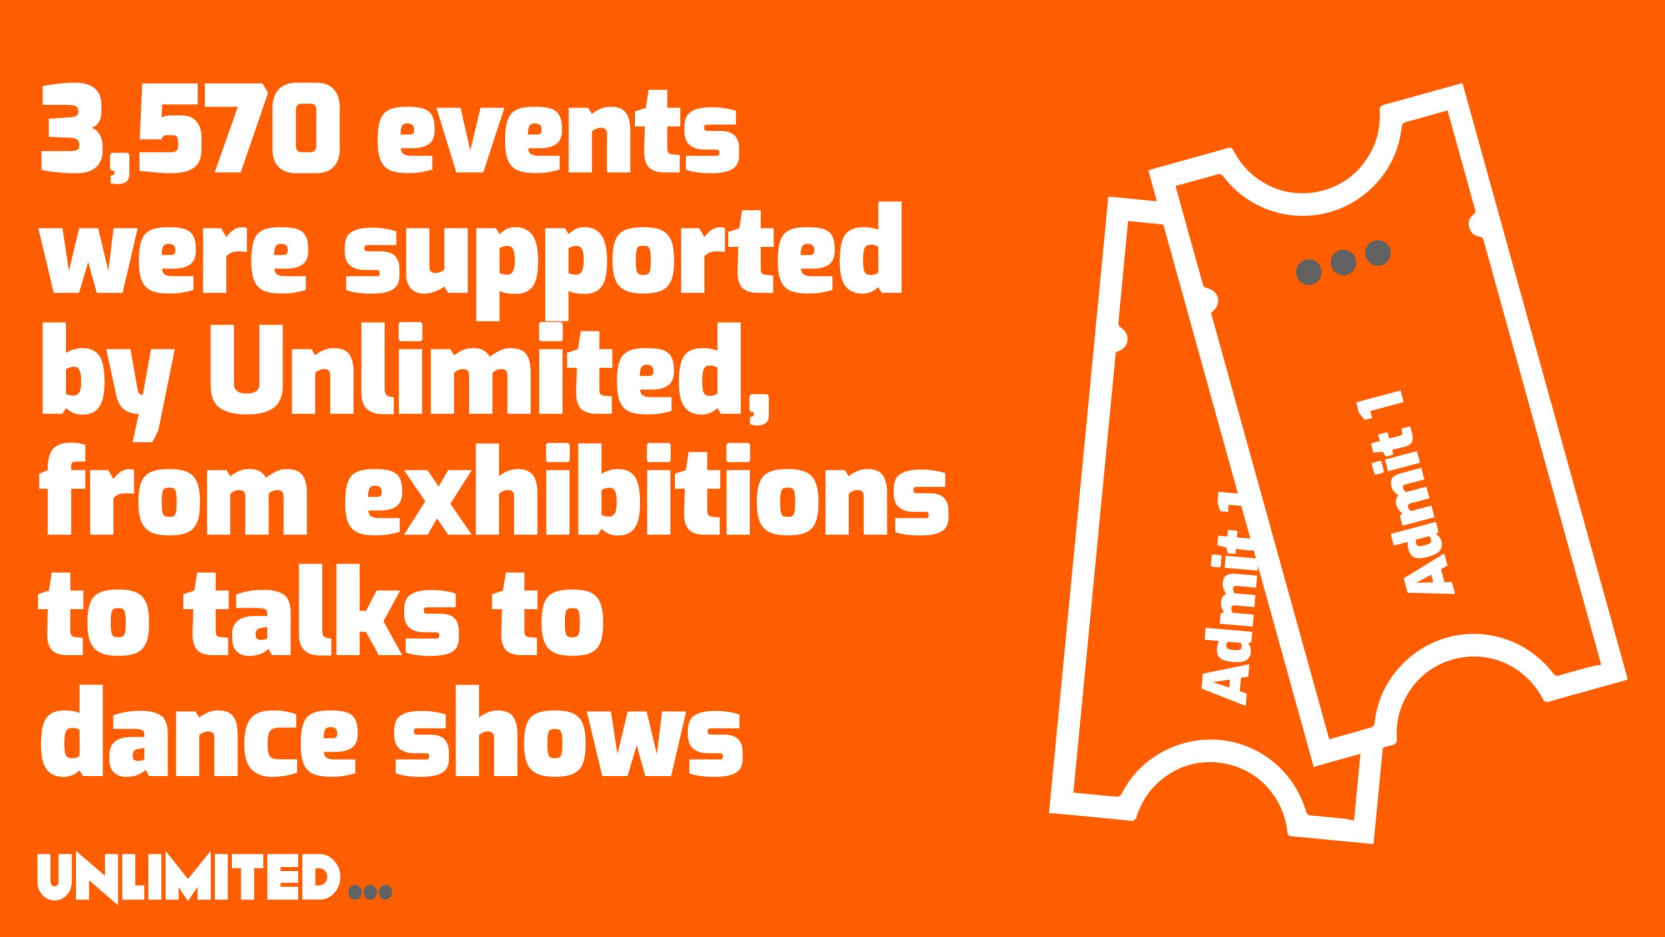 Orange infographic stating that 3570 events were supported by Unlimited, from exhibitions to talks to dance shows